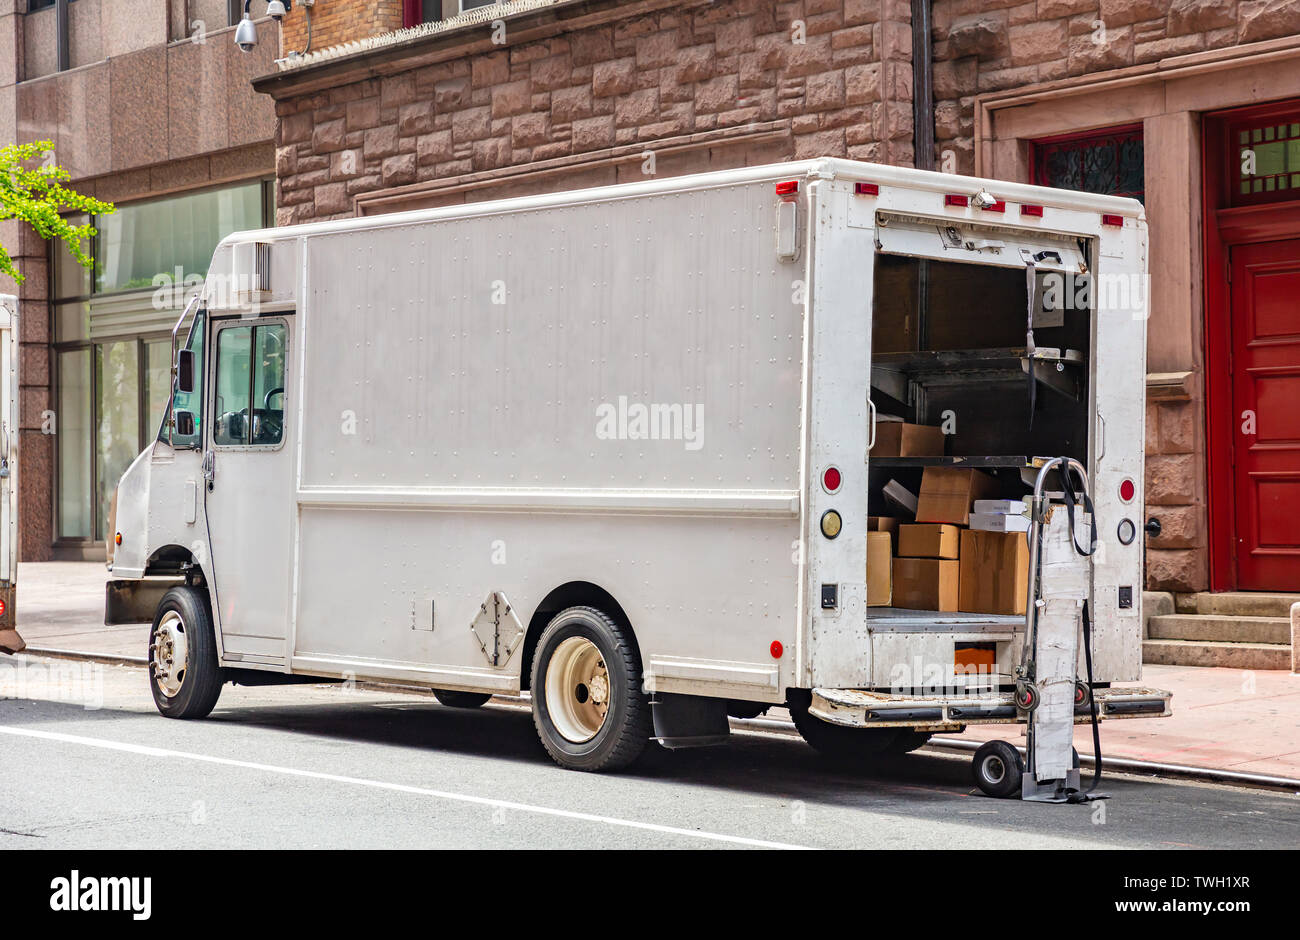 Door to door delivery. Packages in a white color truck with open door, parked on a street downtown, New York Stock Photo